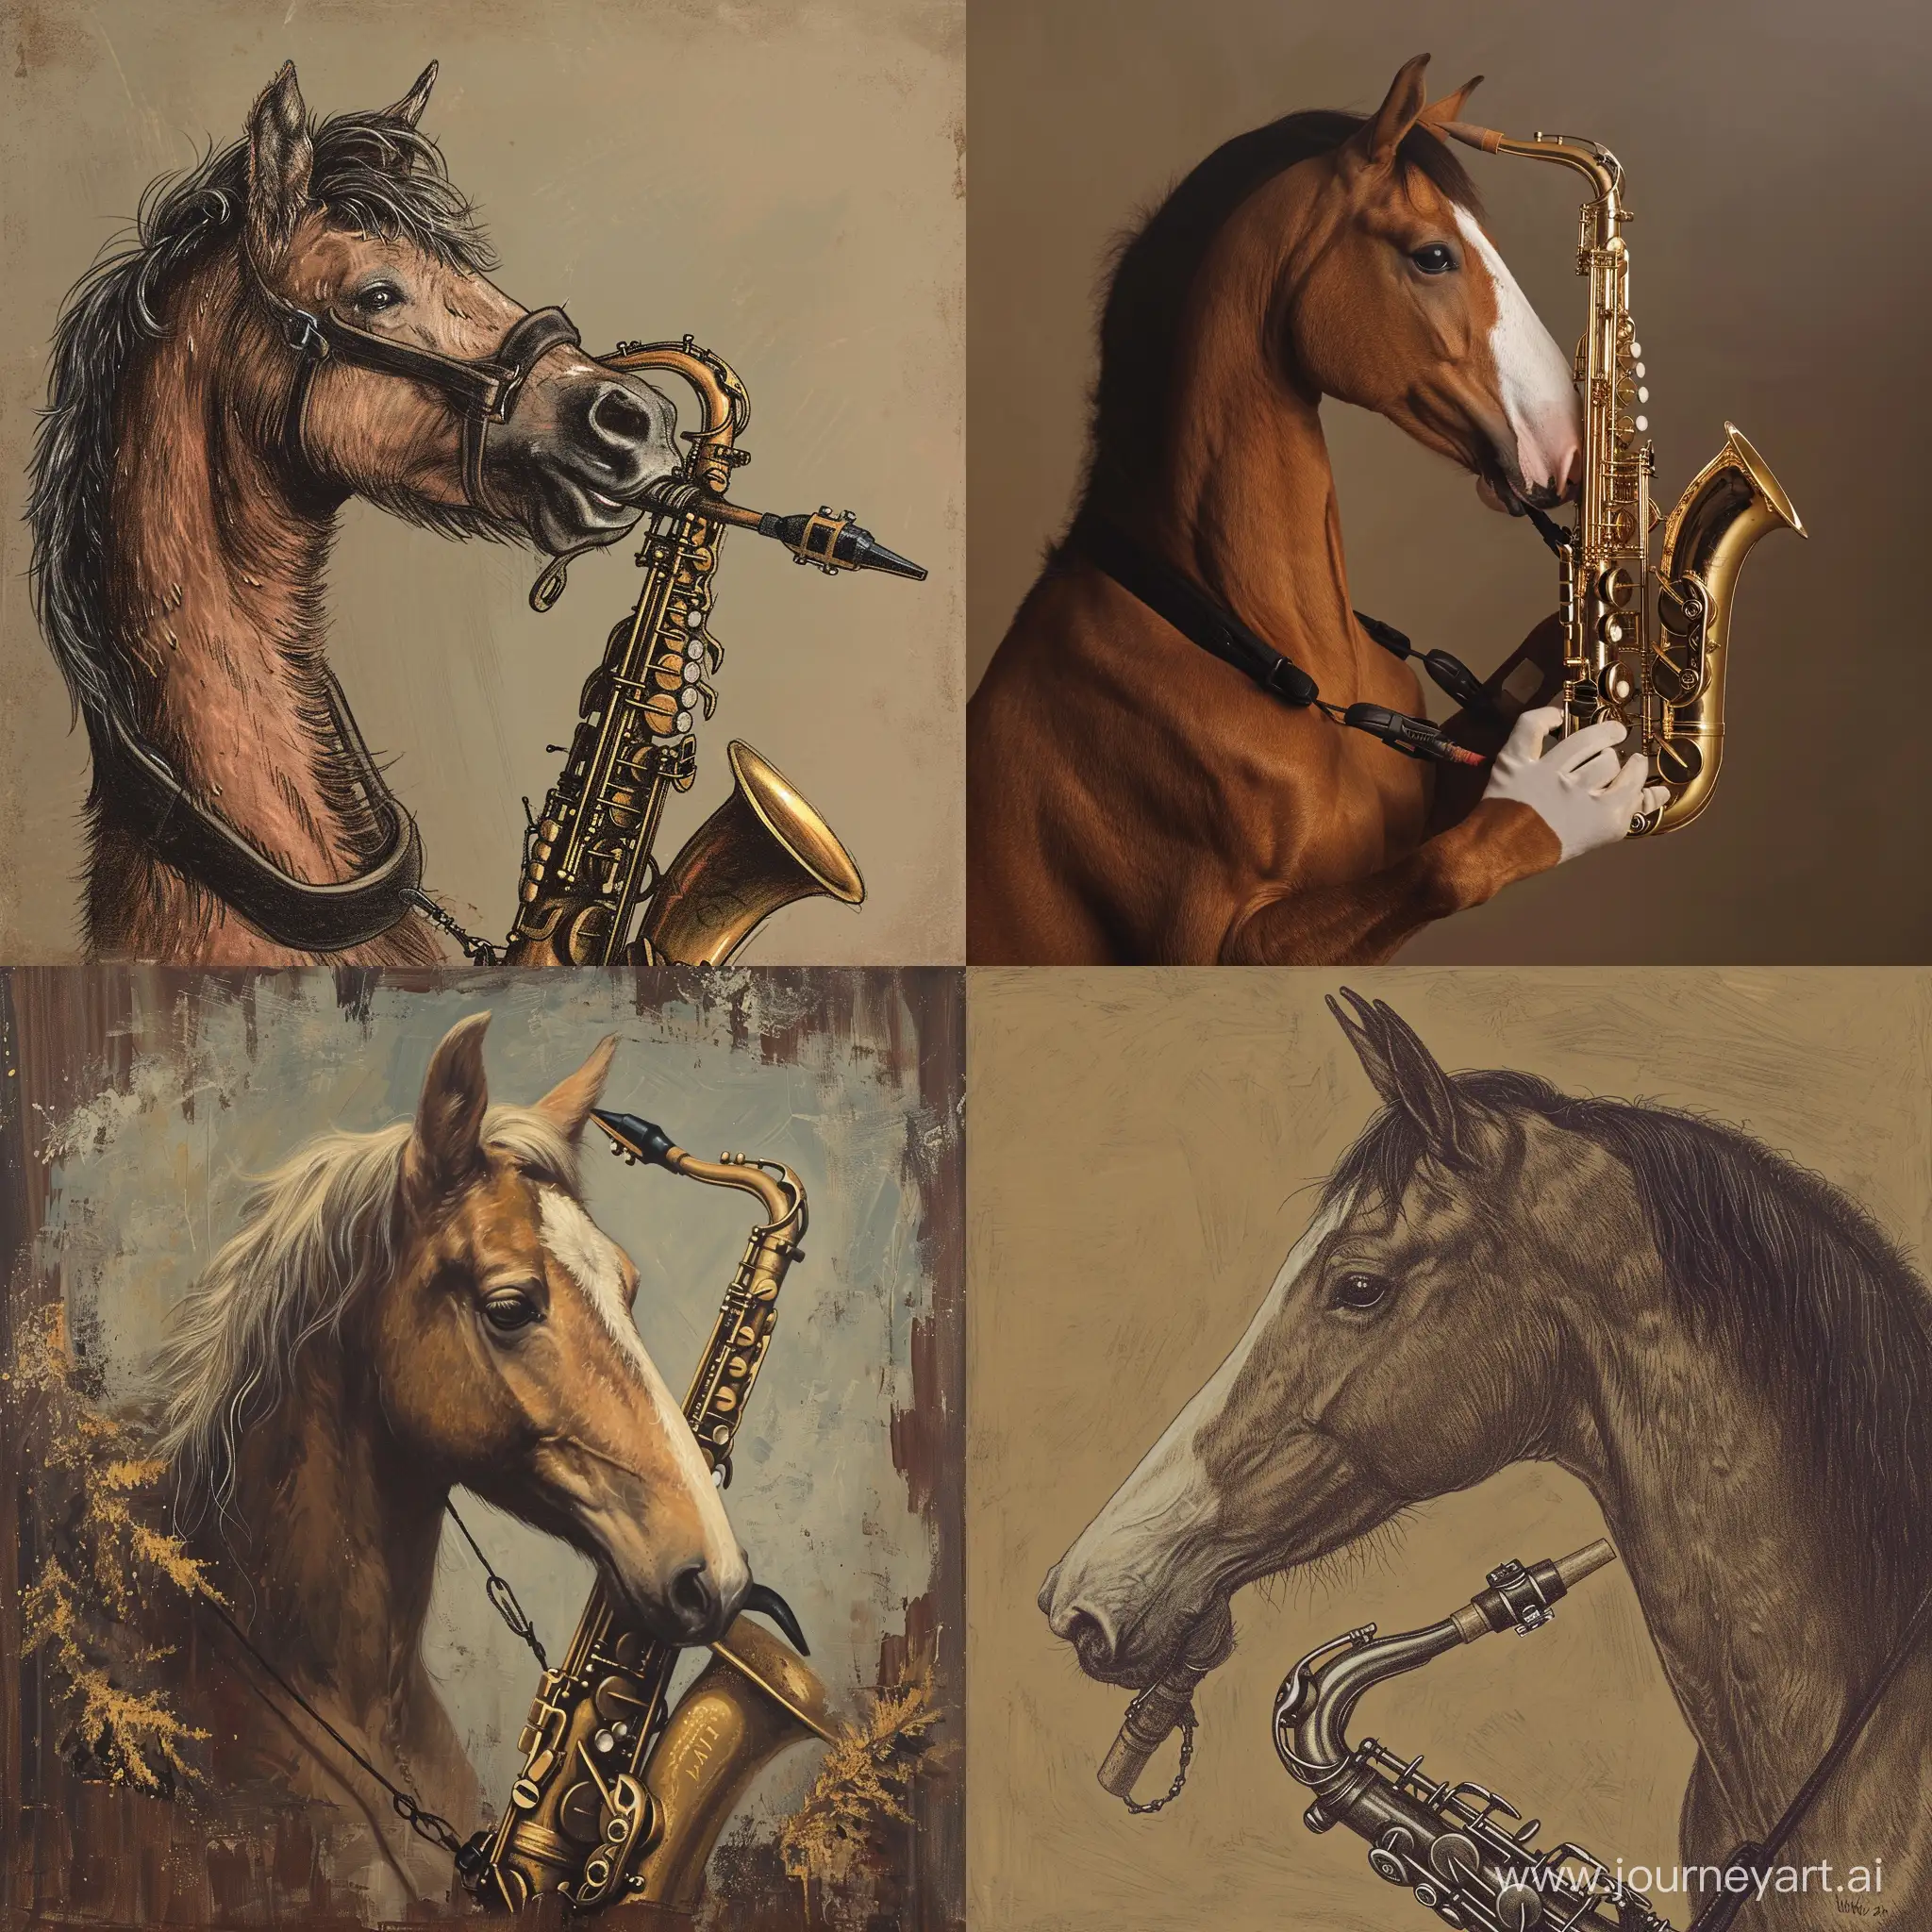 SaxophonePlaying-Horse-Musical-Equine-Delight